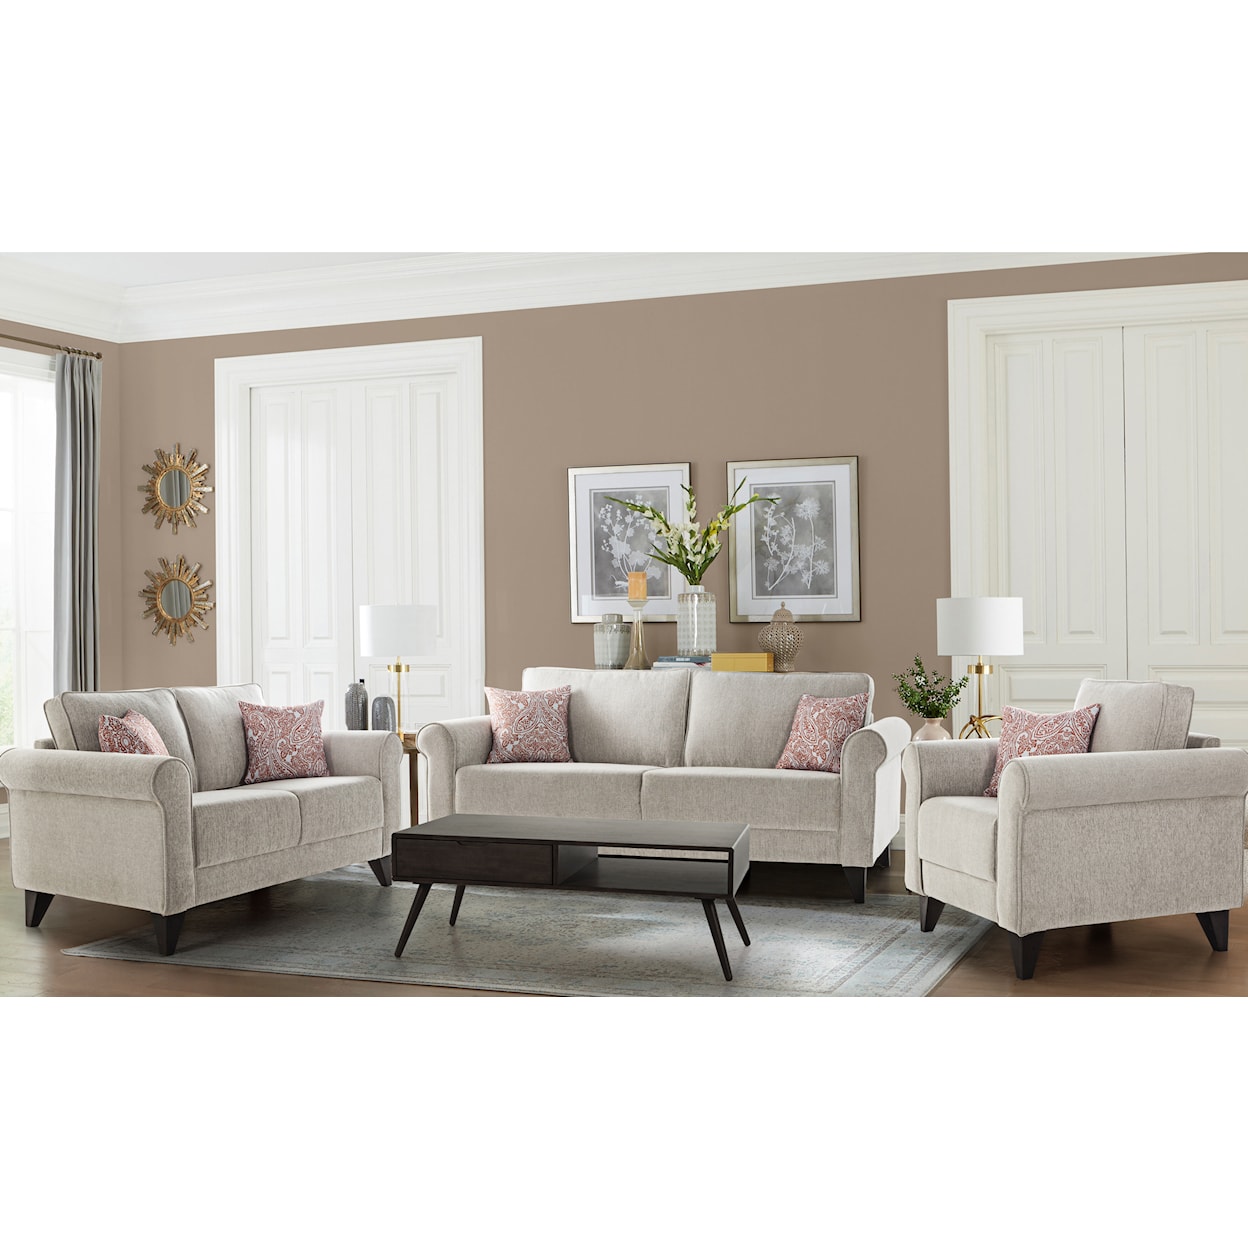 New Classic Ripley Ripley Sofa & Loveseat with FREE CHAIR